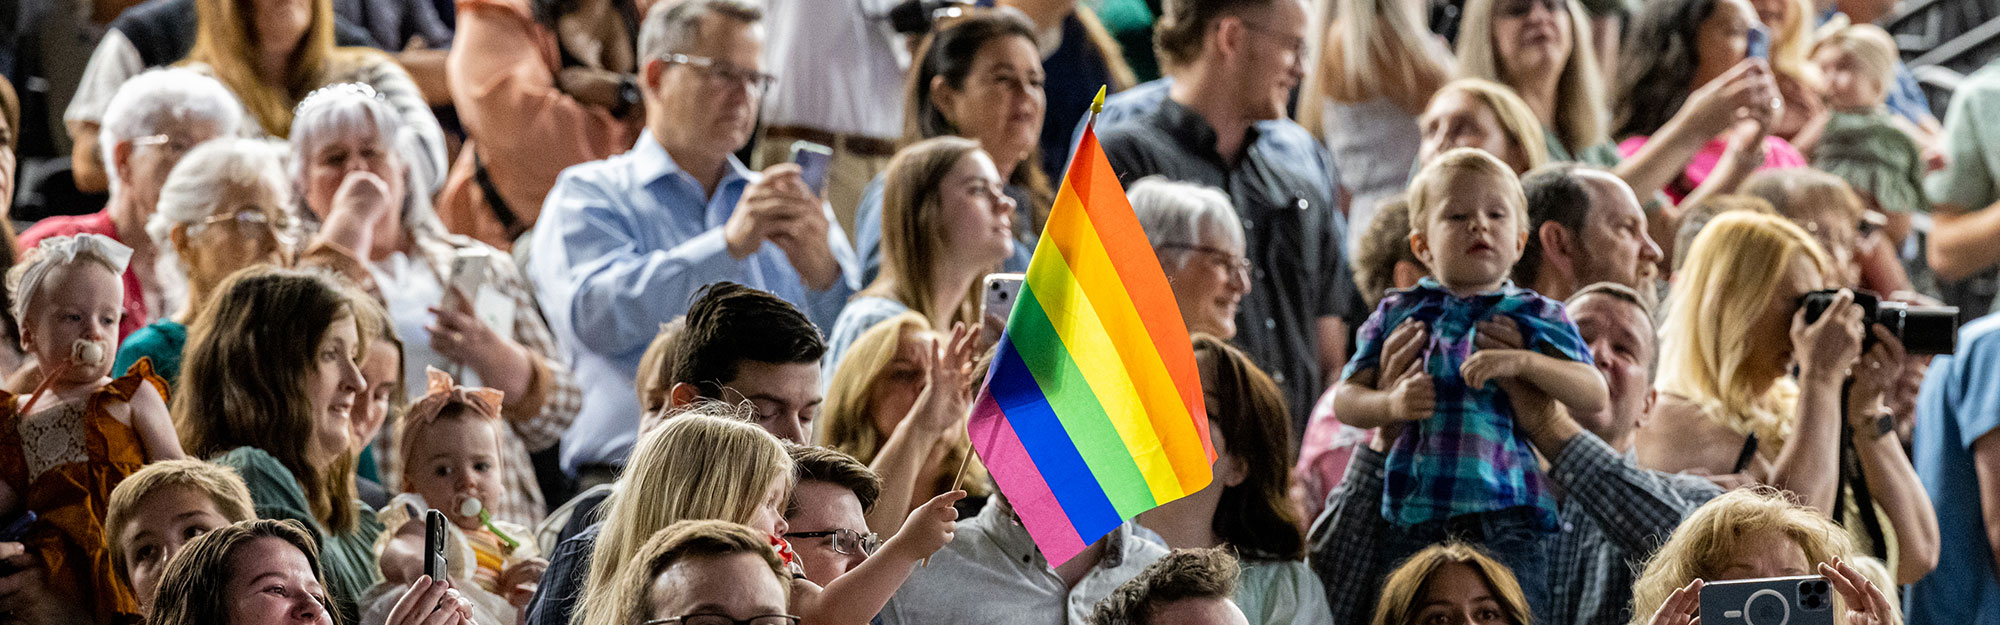 A big crowd with a rainbow flag being held up by a child in the foreground.